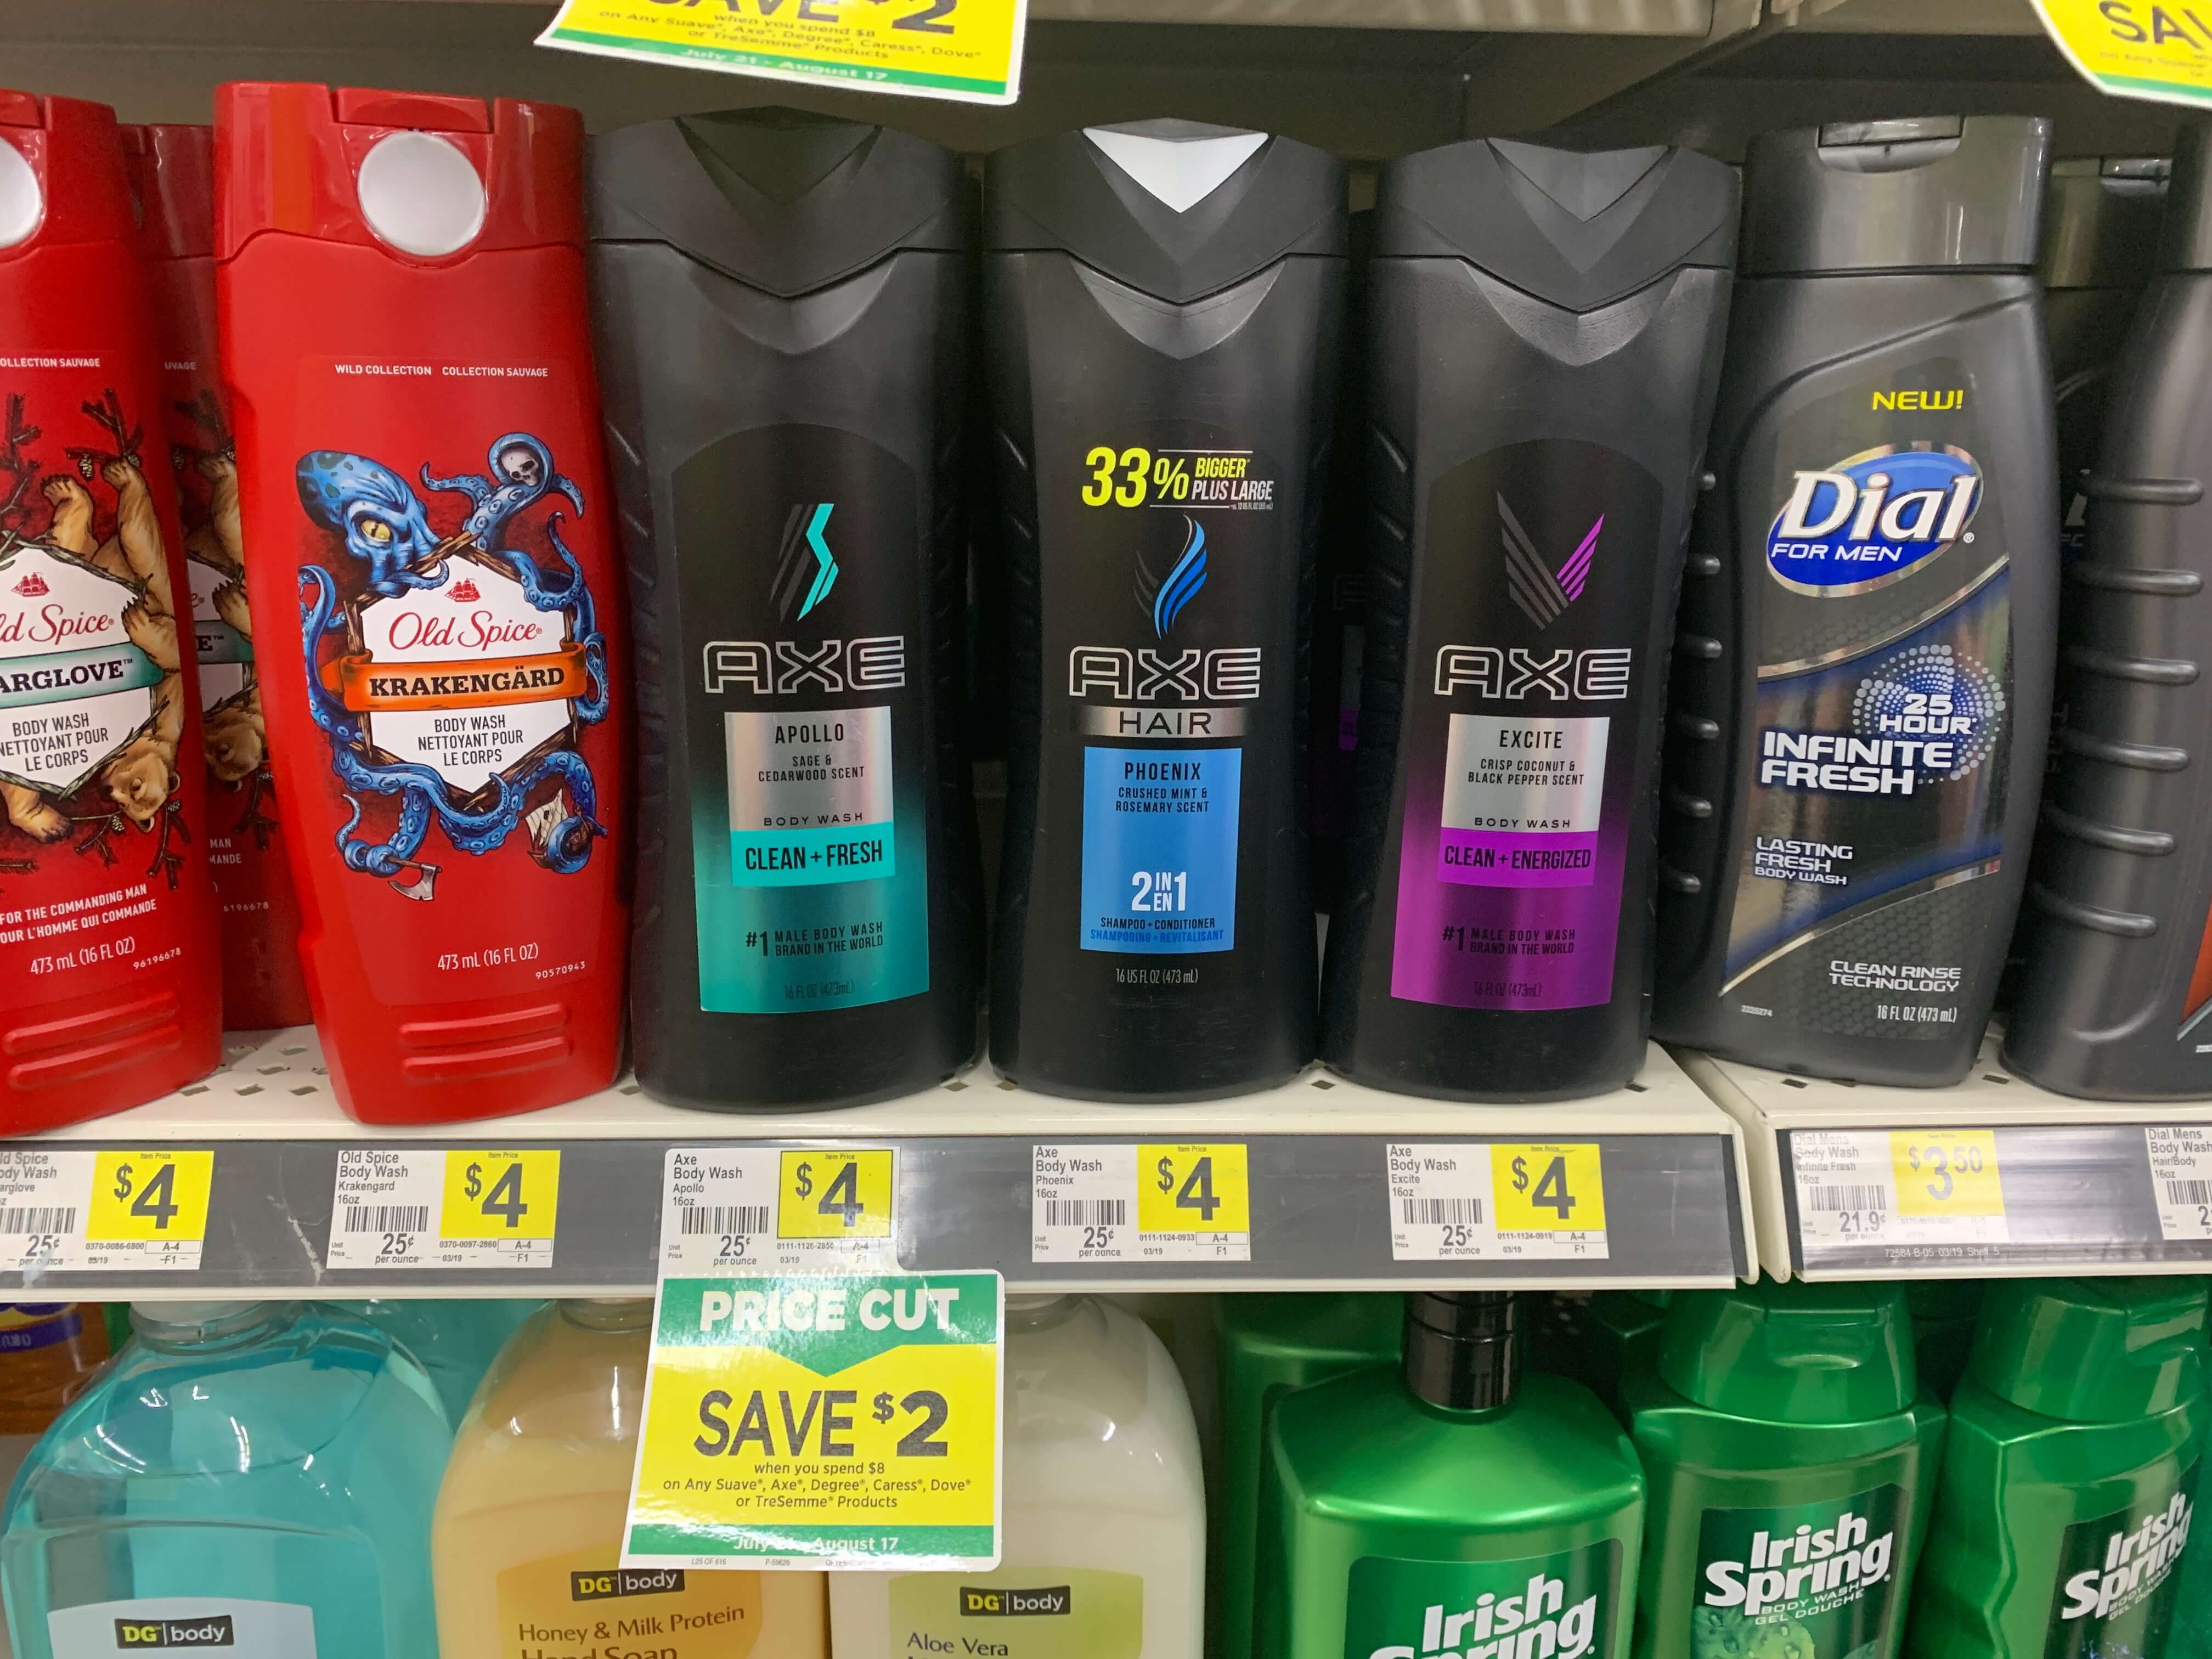 axe-2-in-1-shampoo-conditioner-just-1-at-dollar-general-ibotta